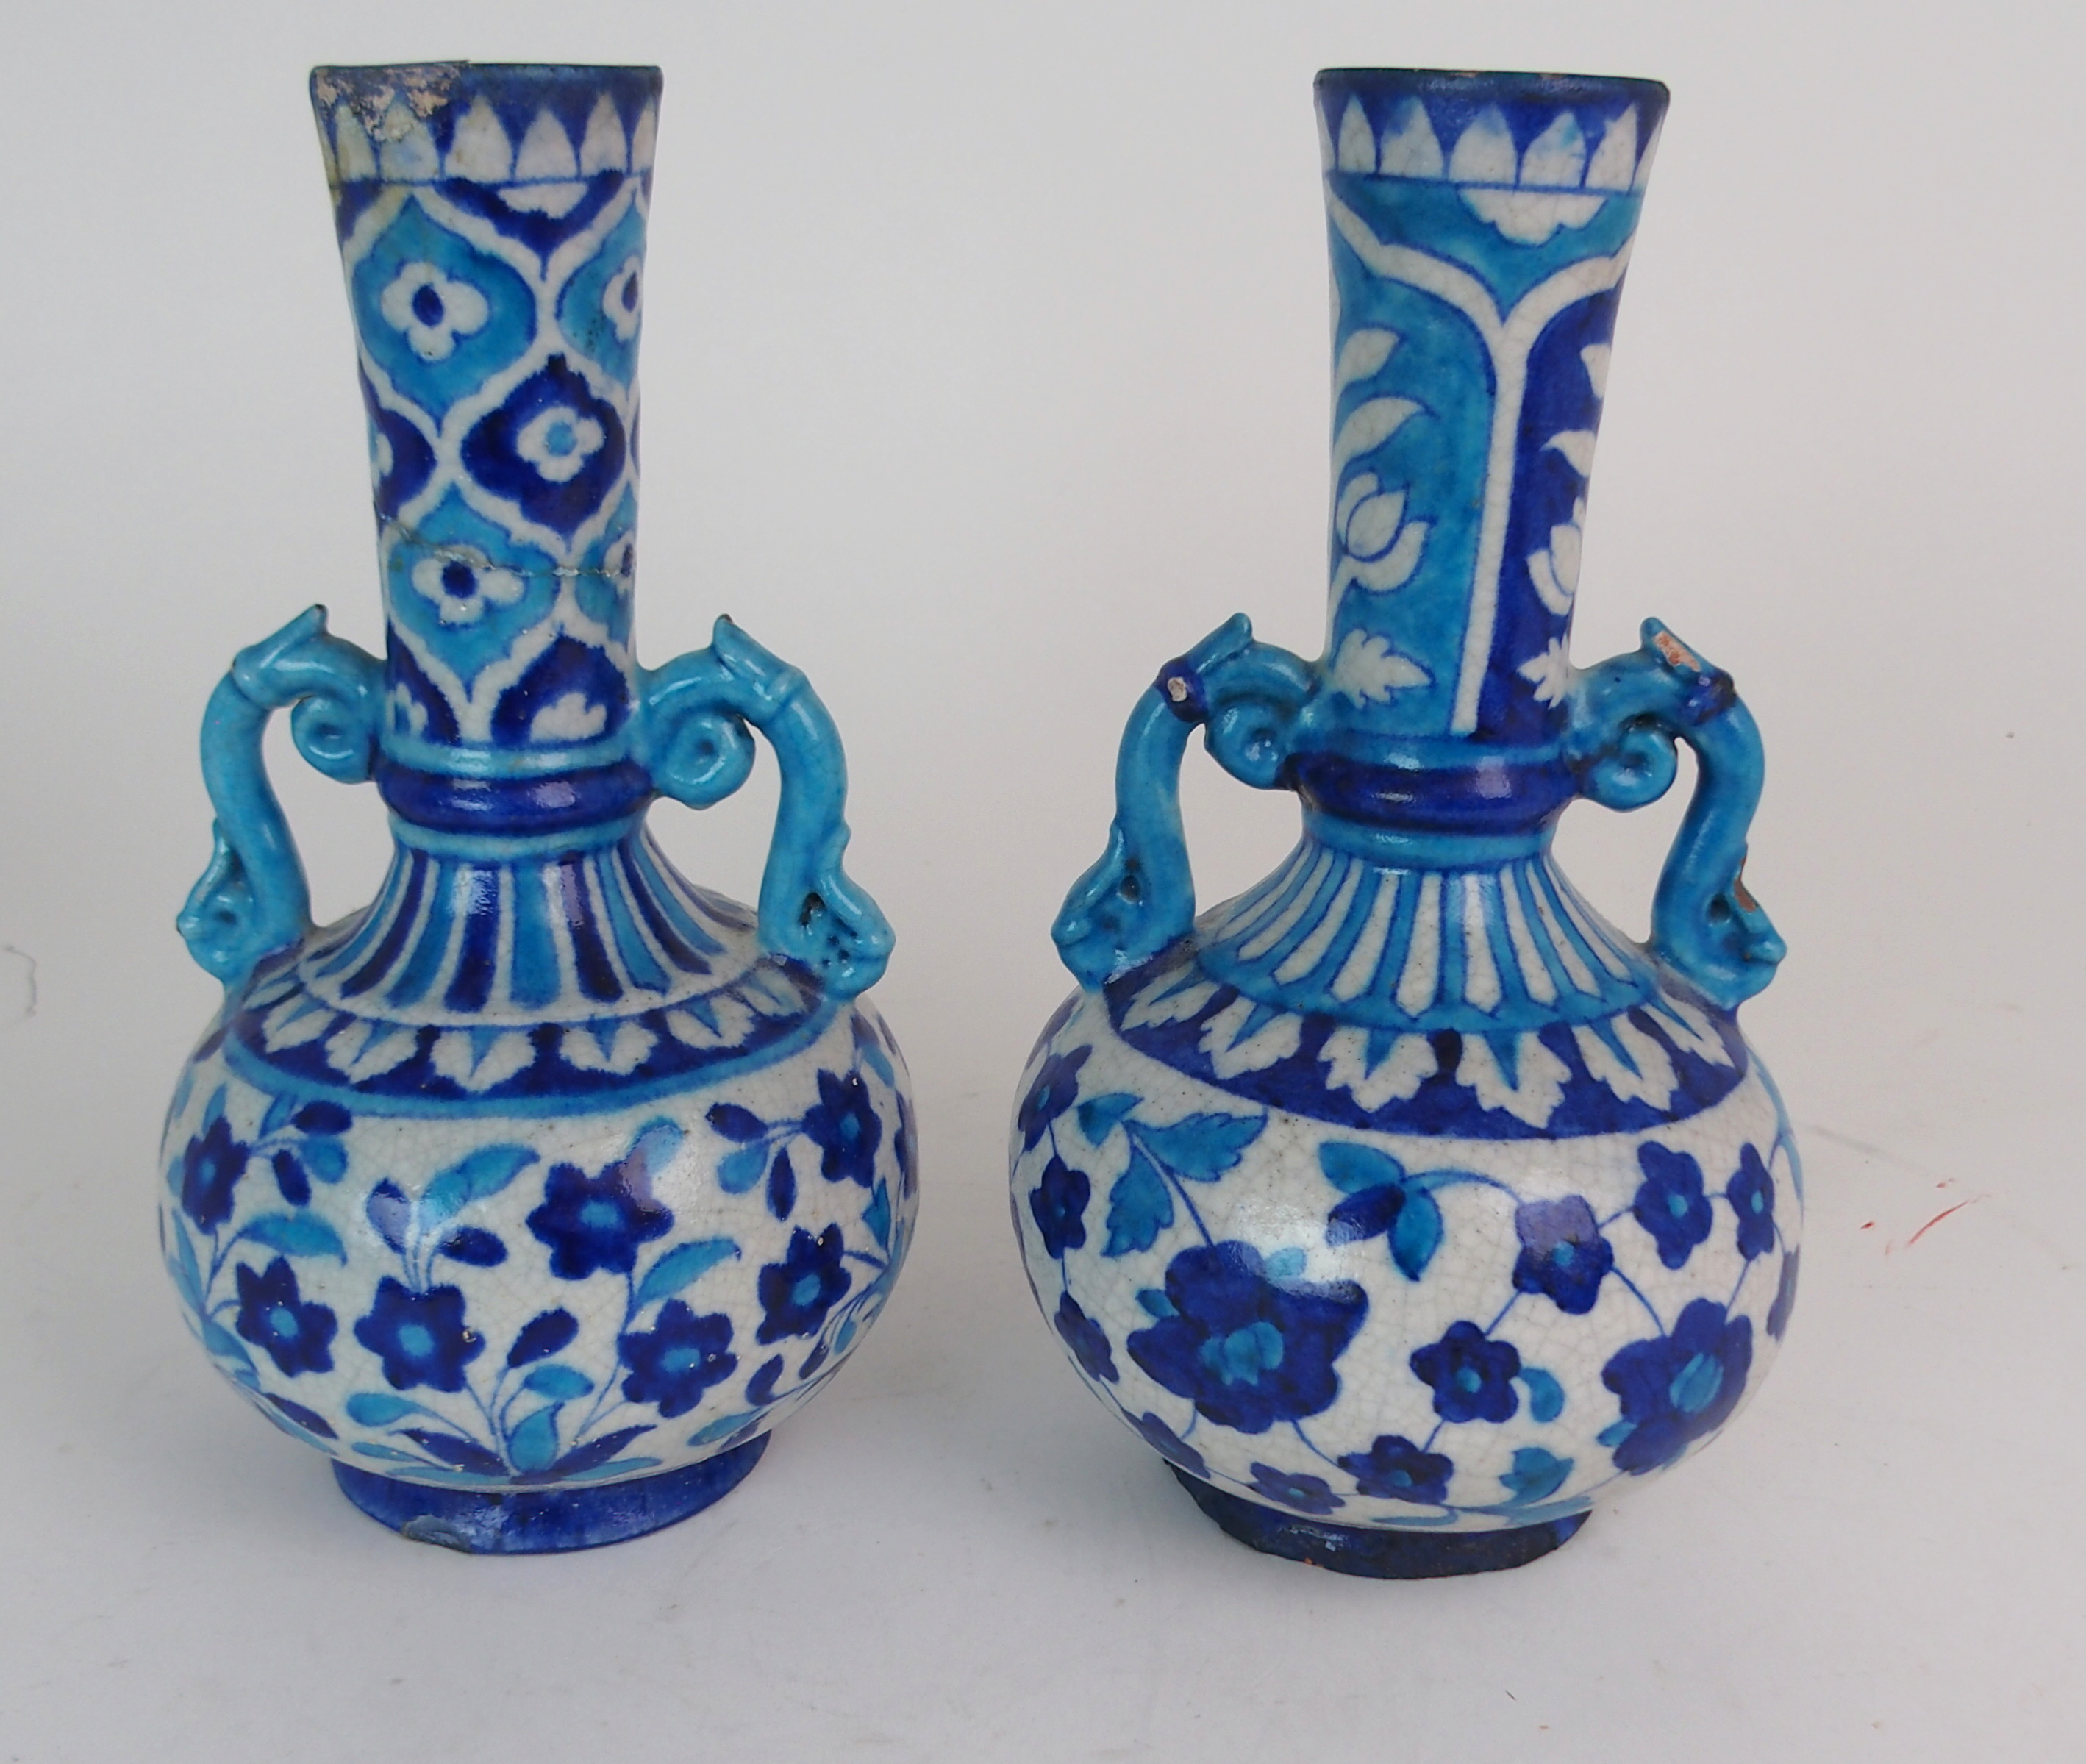 A PAIR OF PERSIAN POTTERY BLUE AND WHITE TWO HANDLED VASES painted with flowers and foliage, with